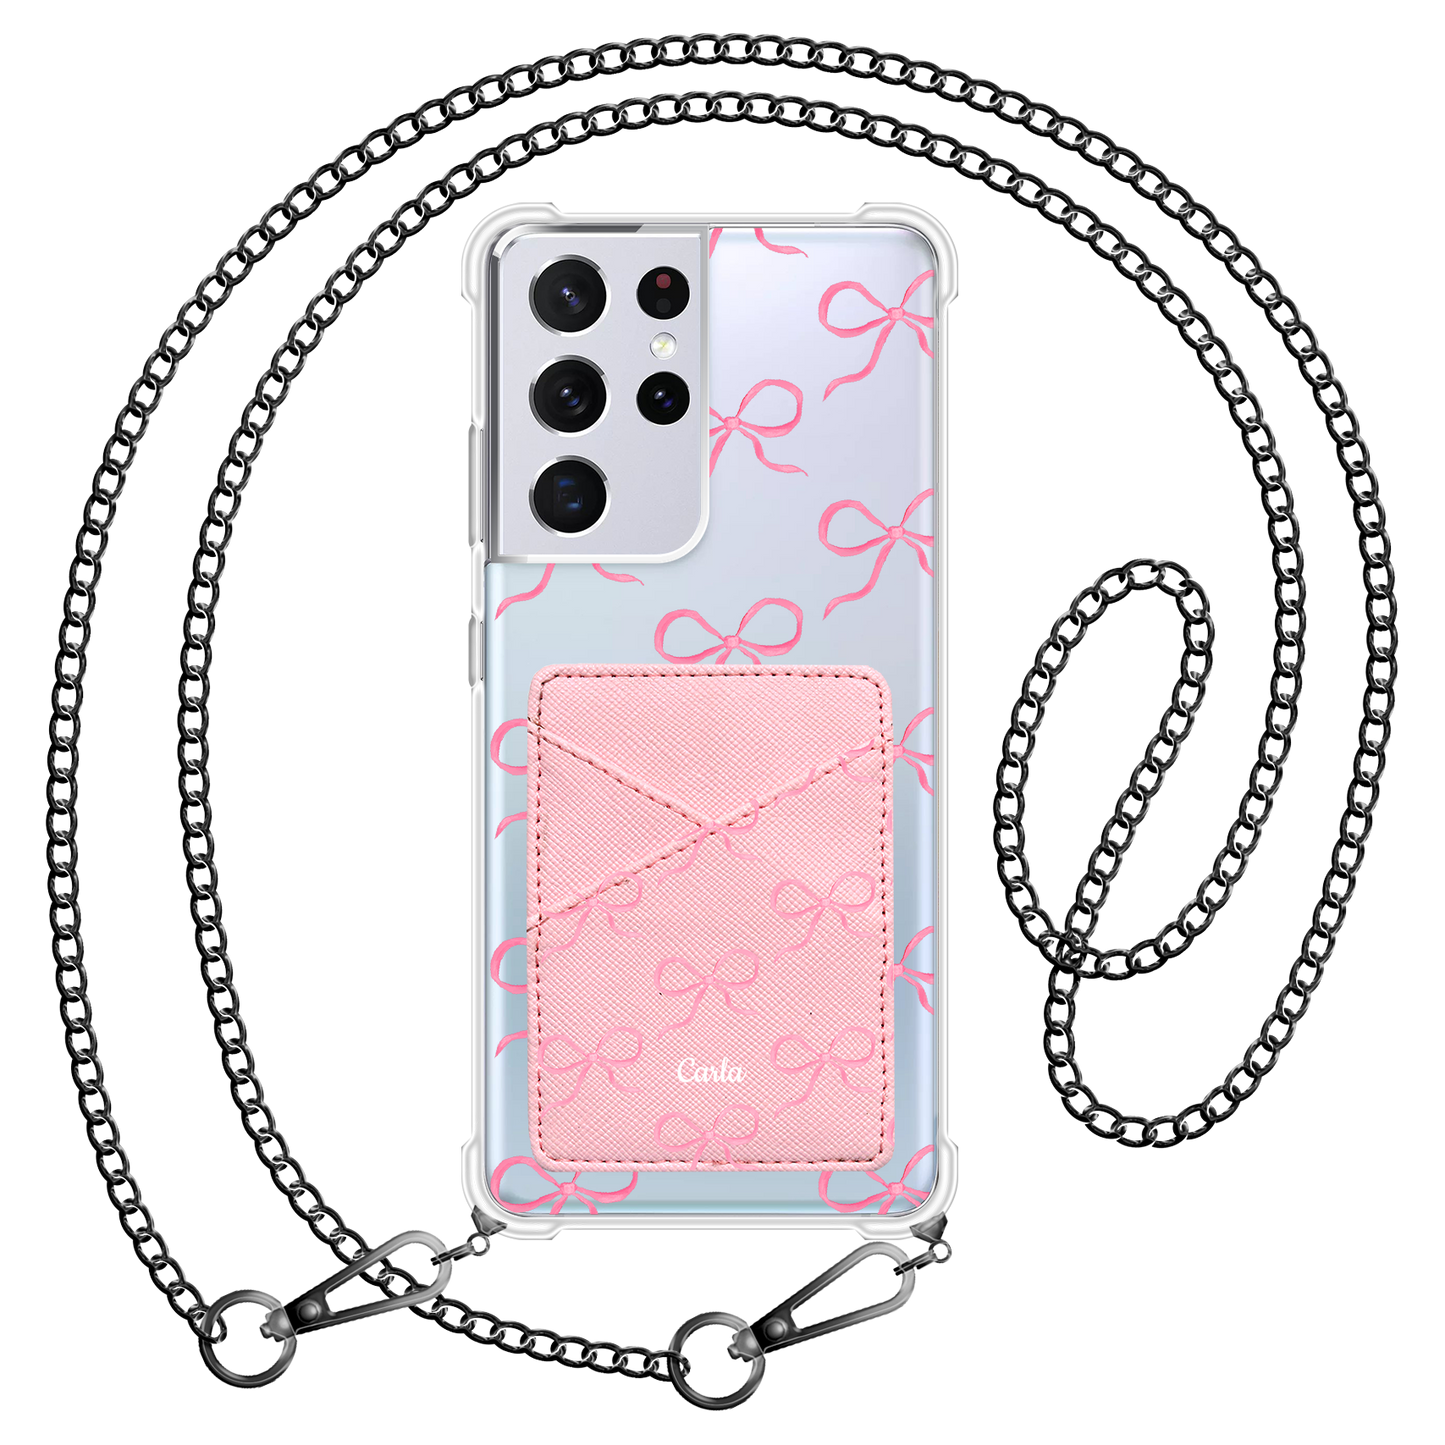 Android Phone Wallet Case - Coquette Pink Bow 1.0